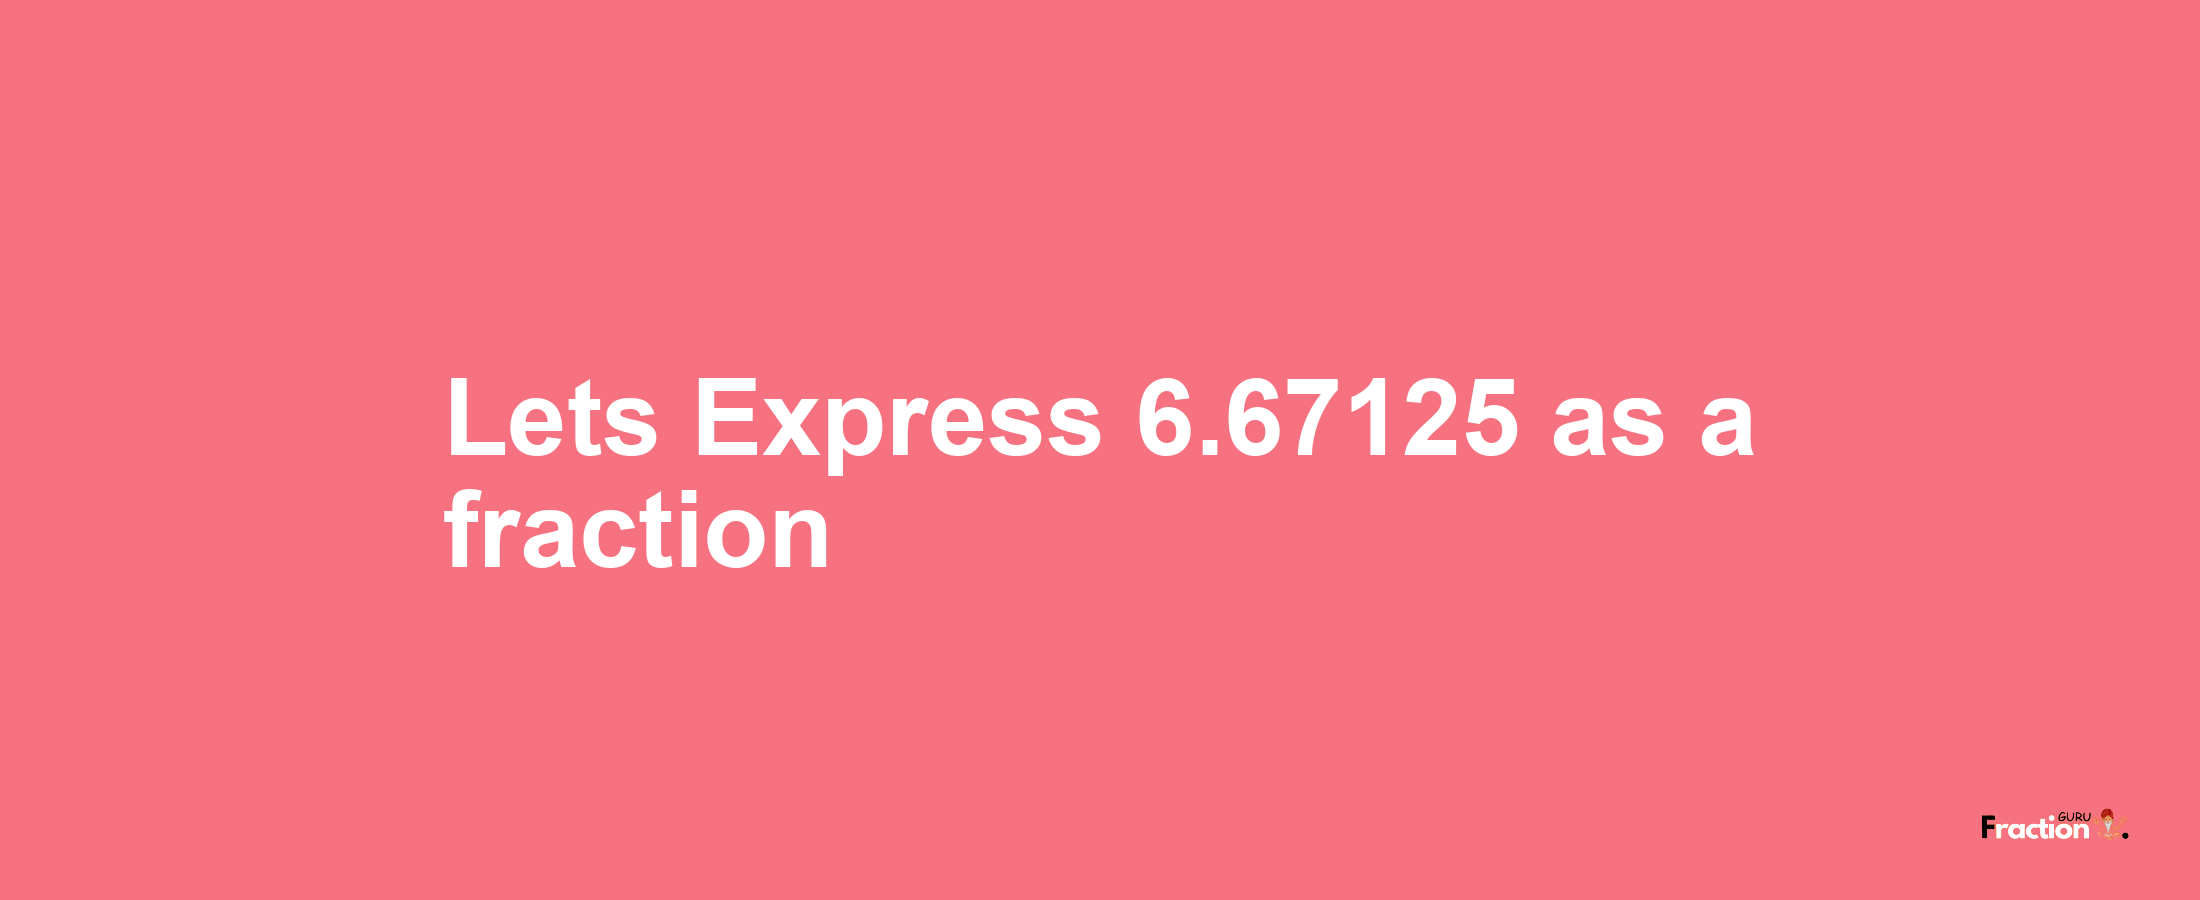 Lets Express 6.67125 as afraction